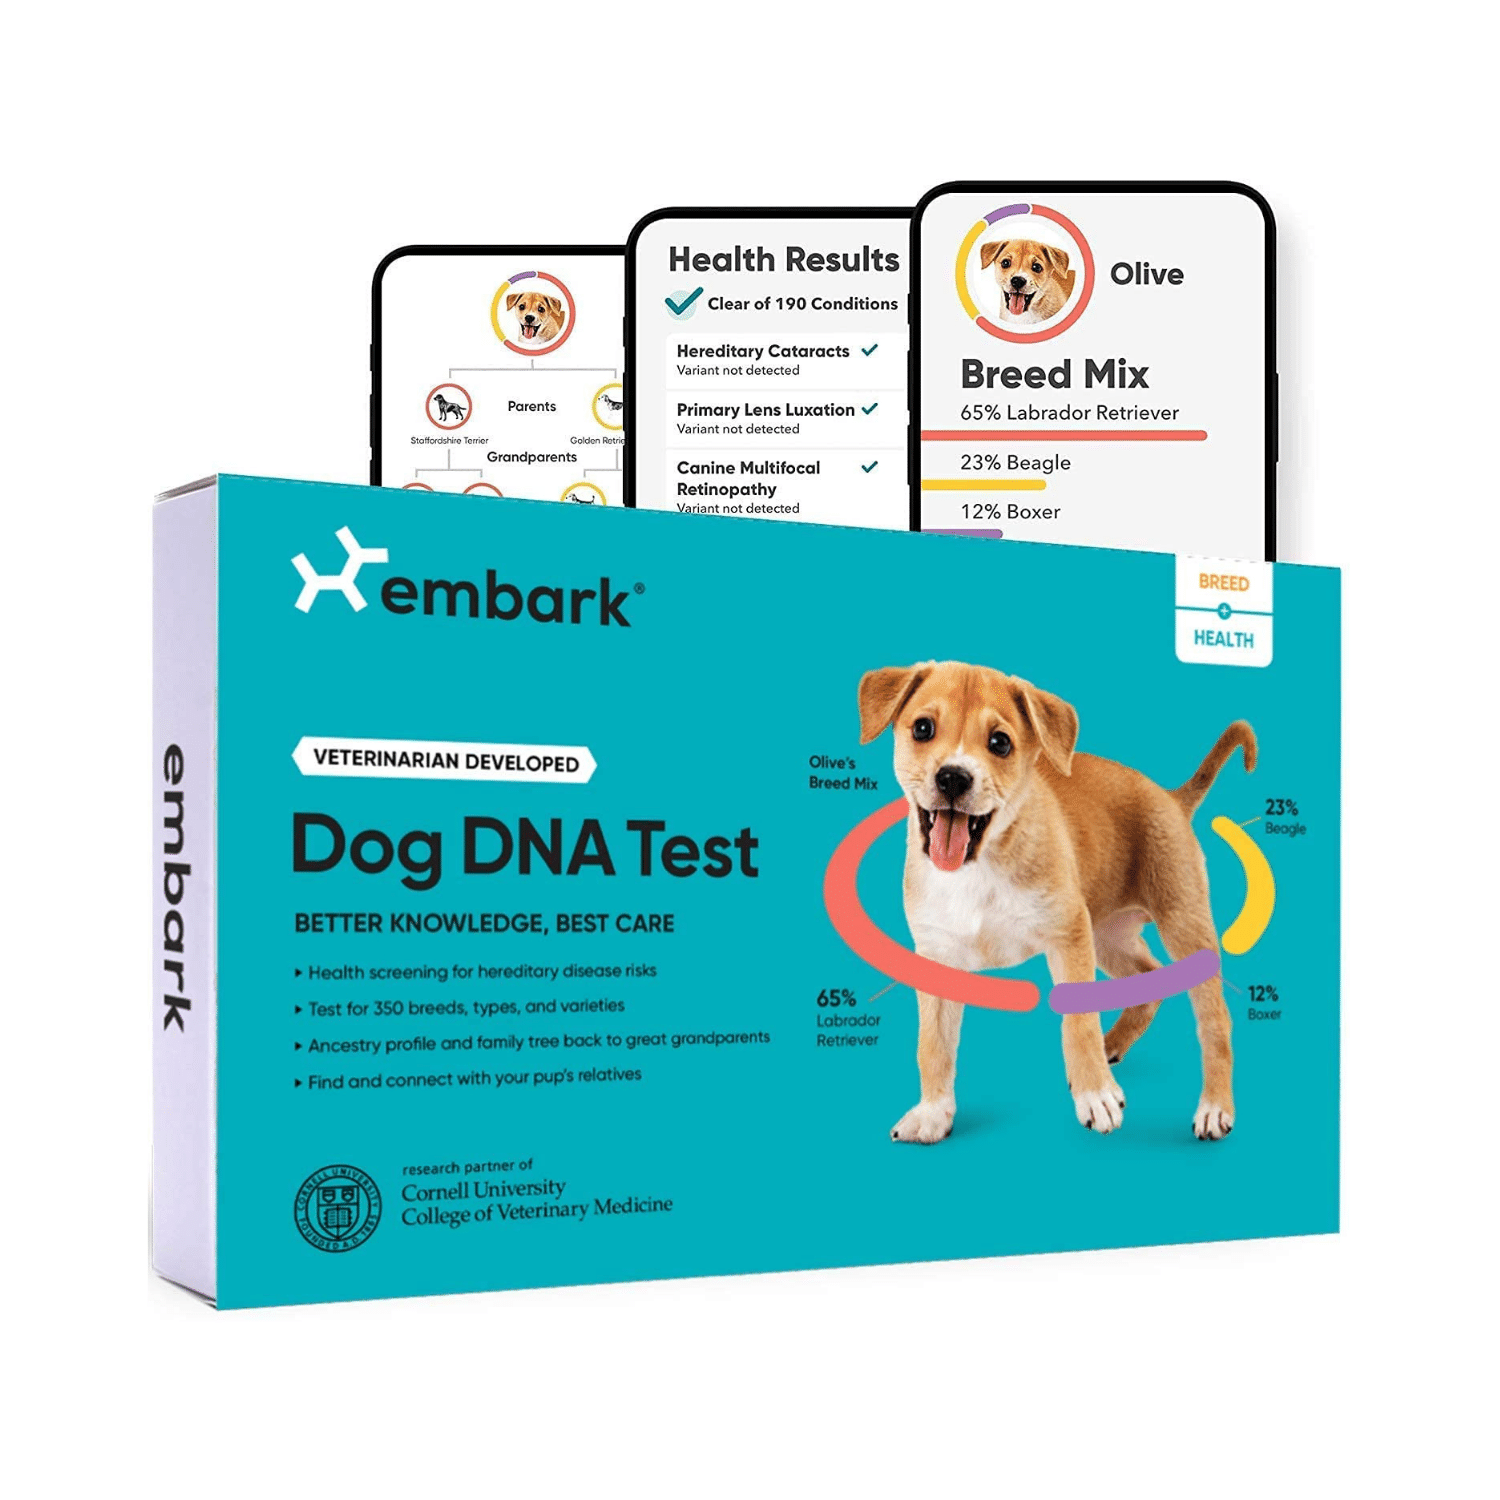 Embark Breed And Health Dog DNA Kit Test